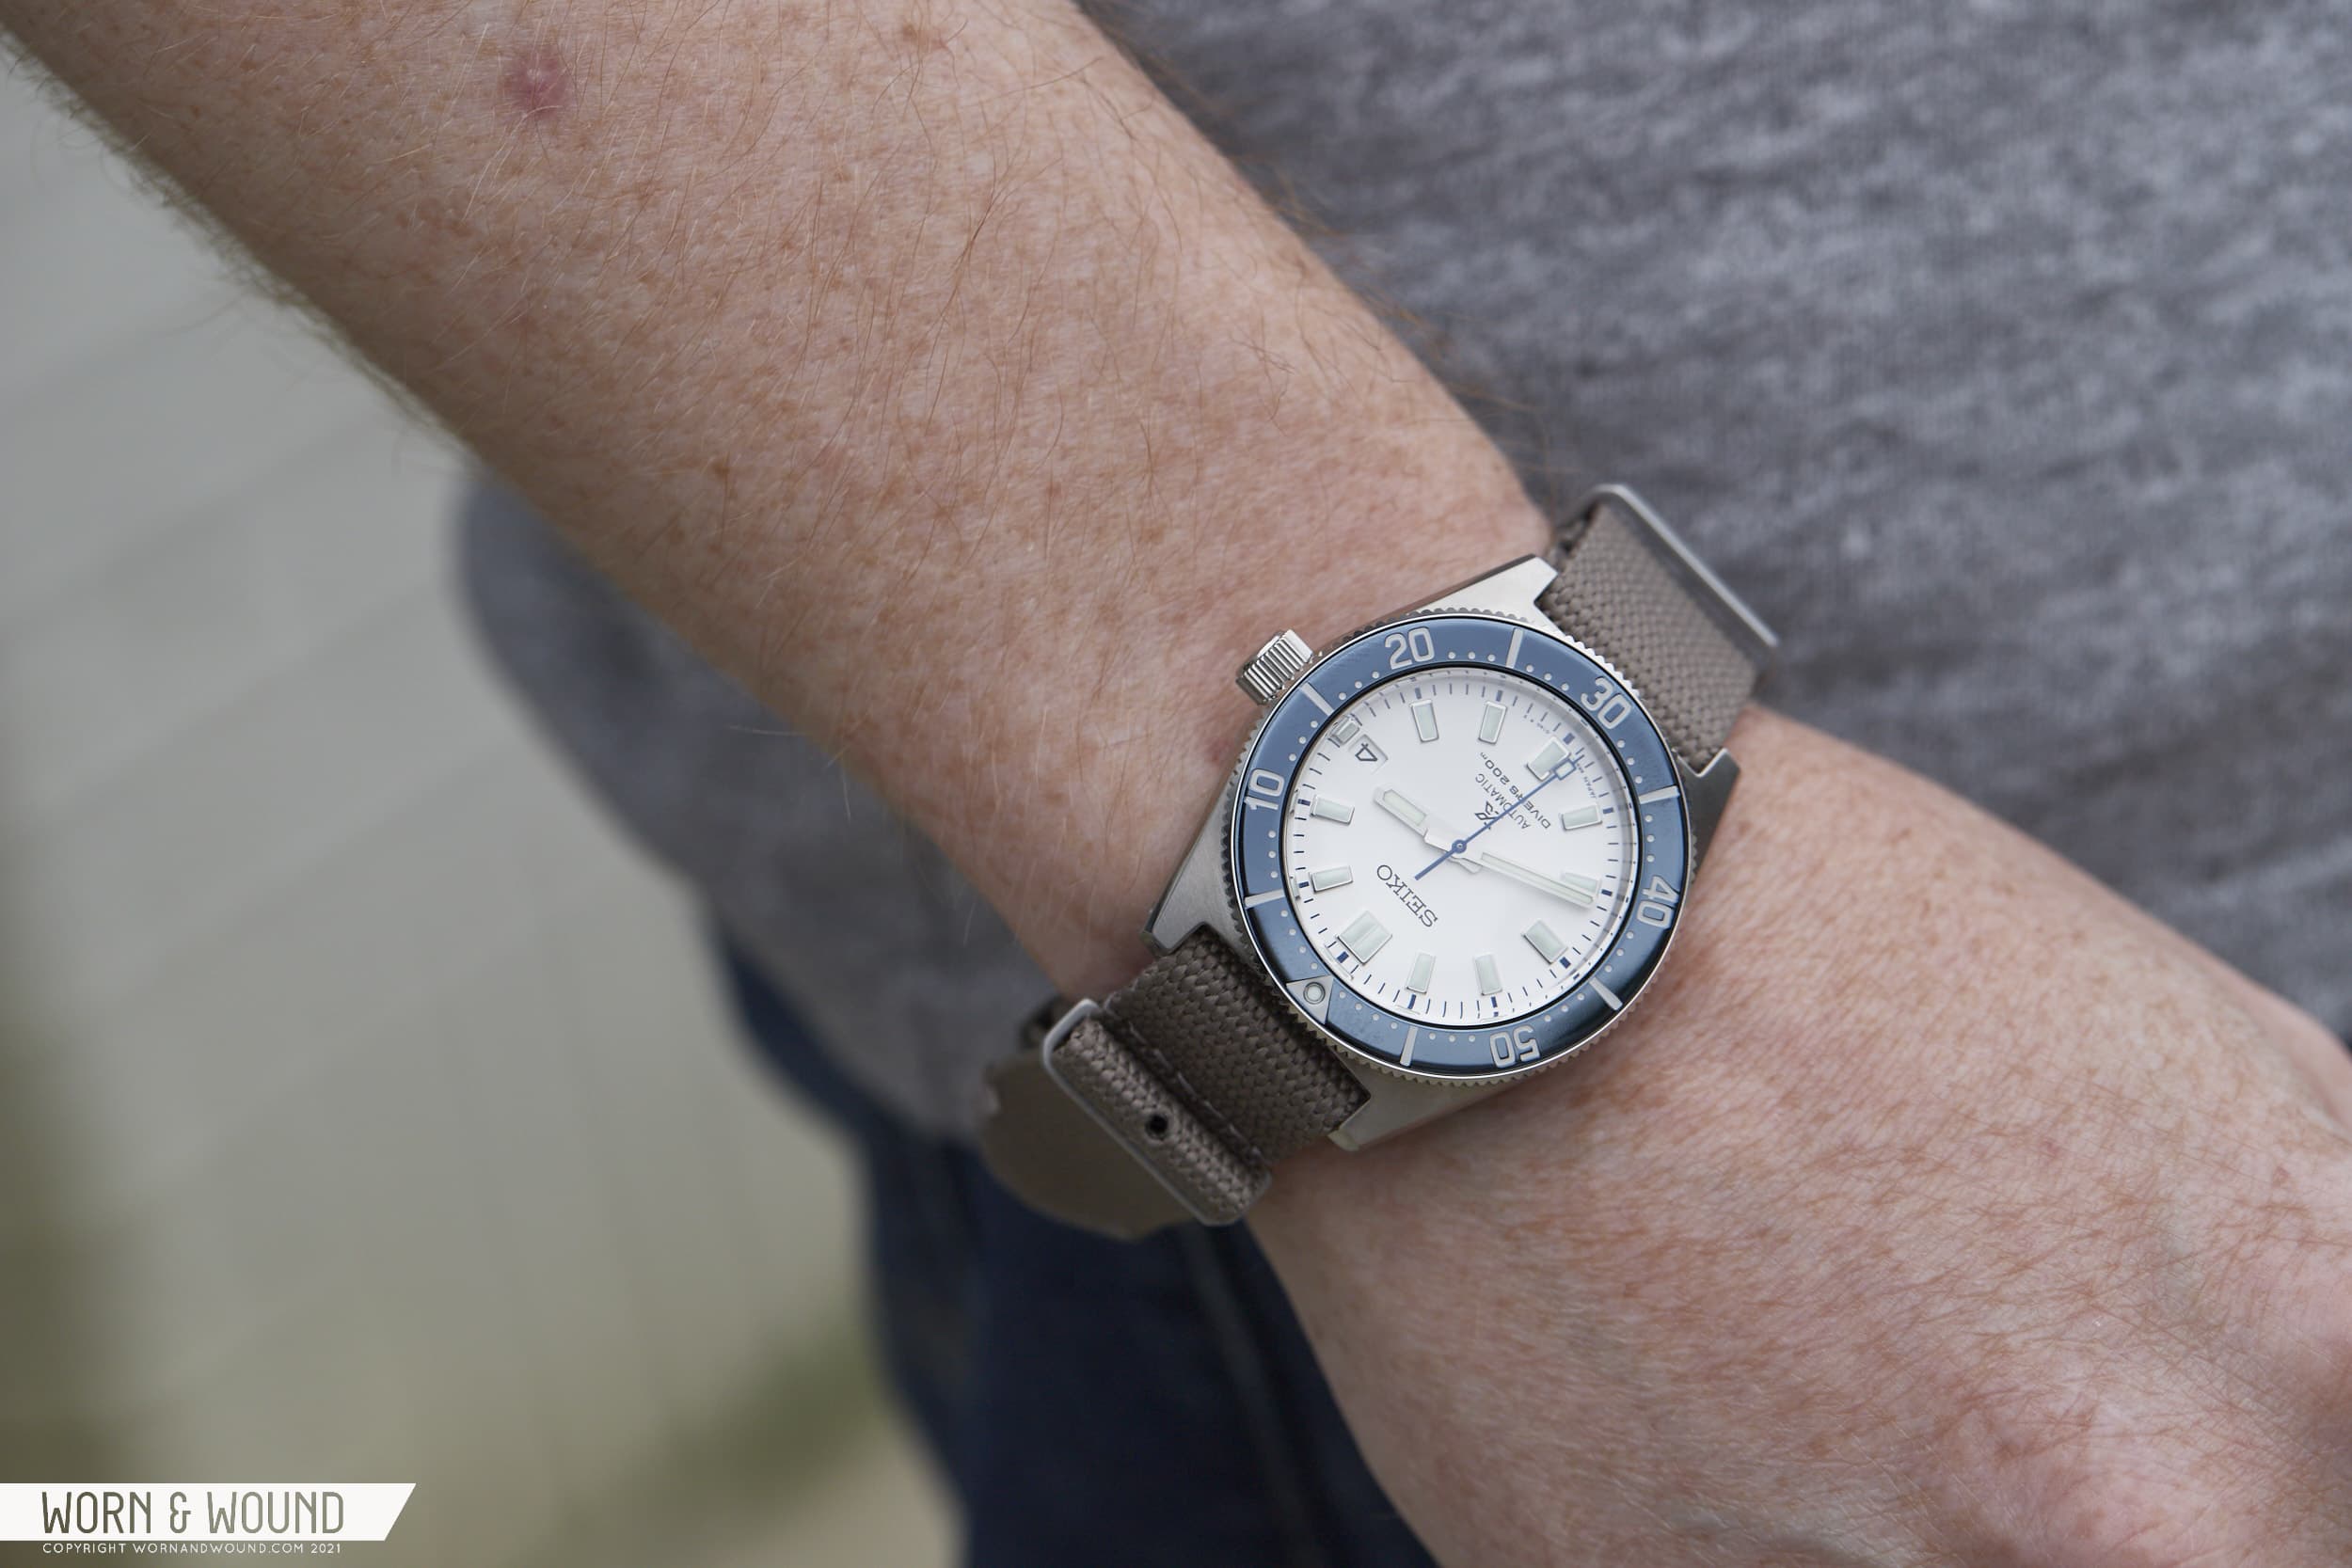 Hands-On With The 140th Anniversary Seiko SPB213 - Worn & Wound